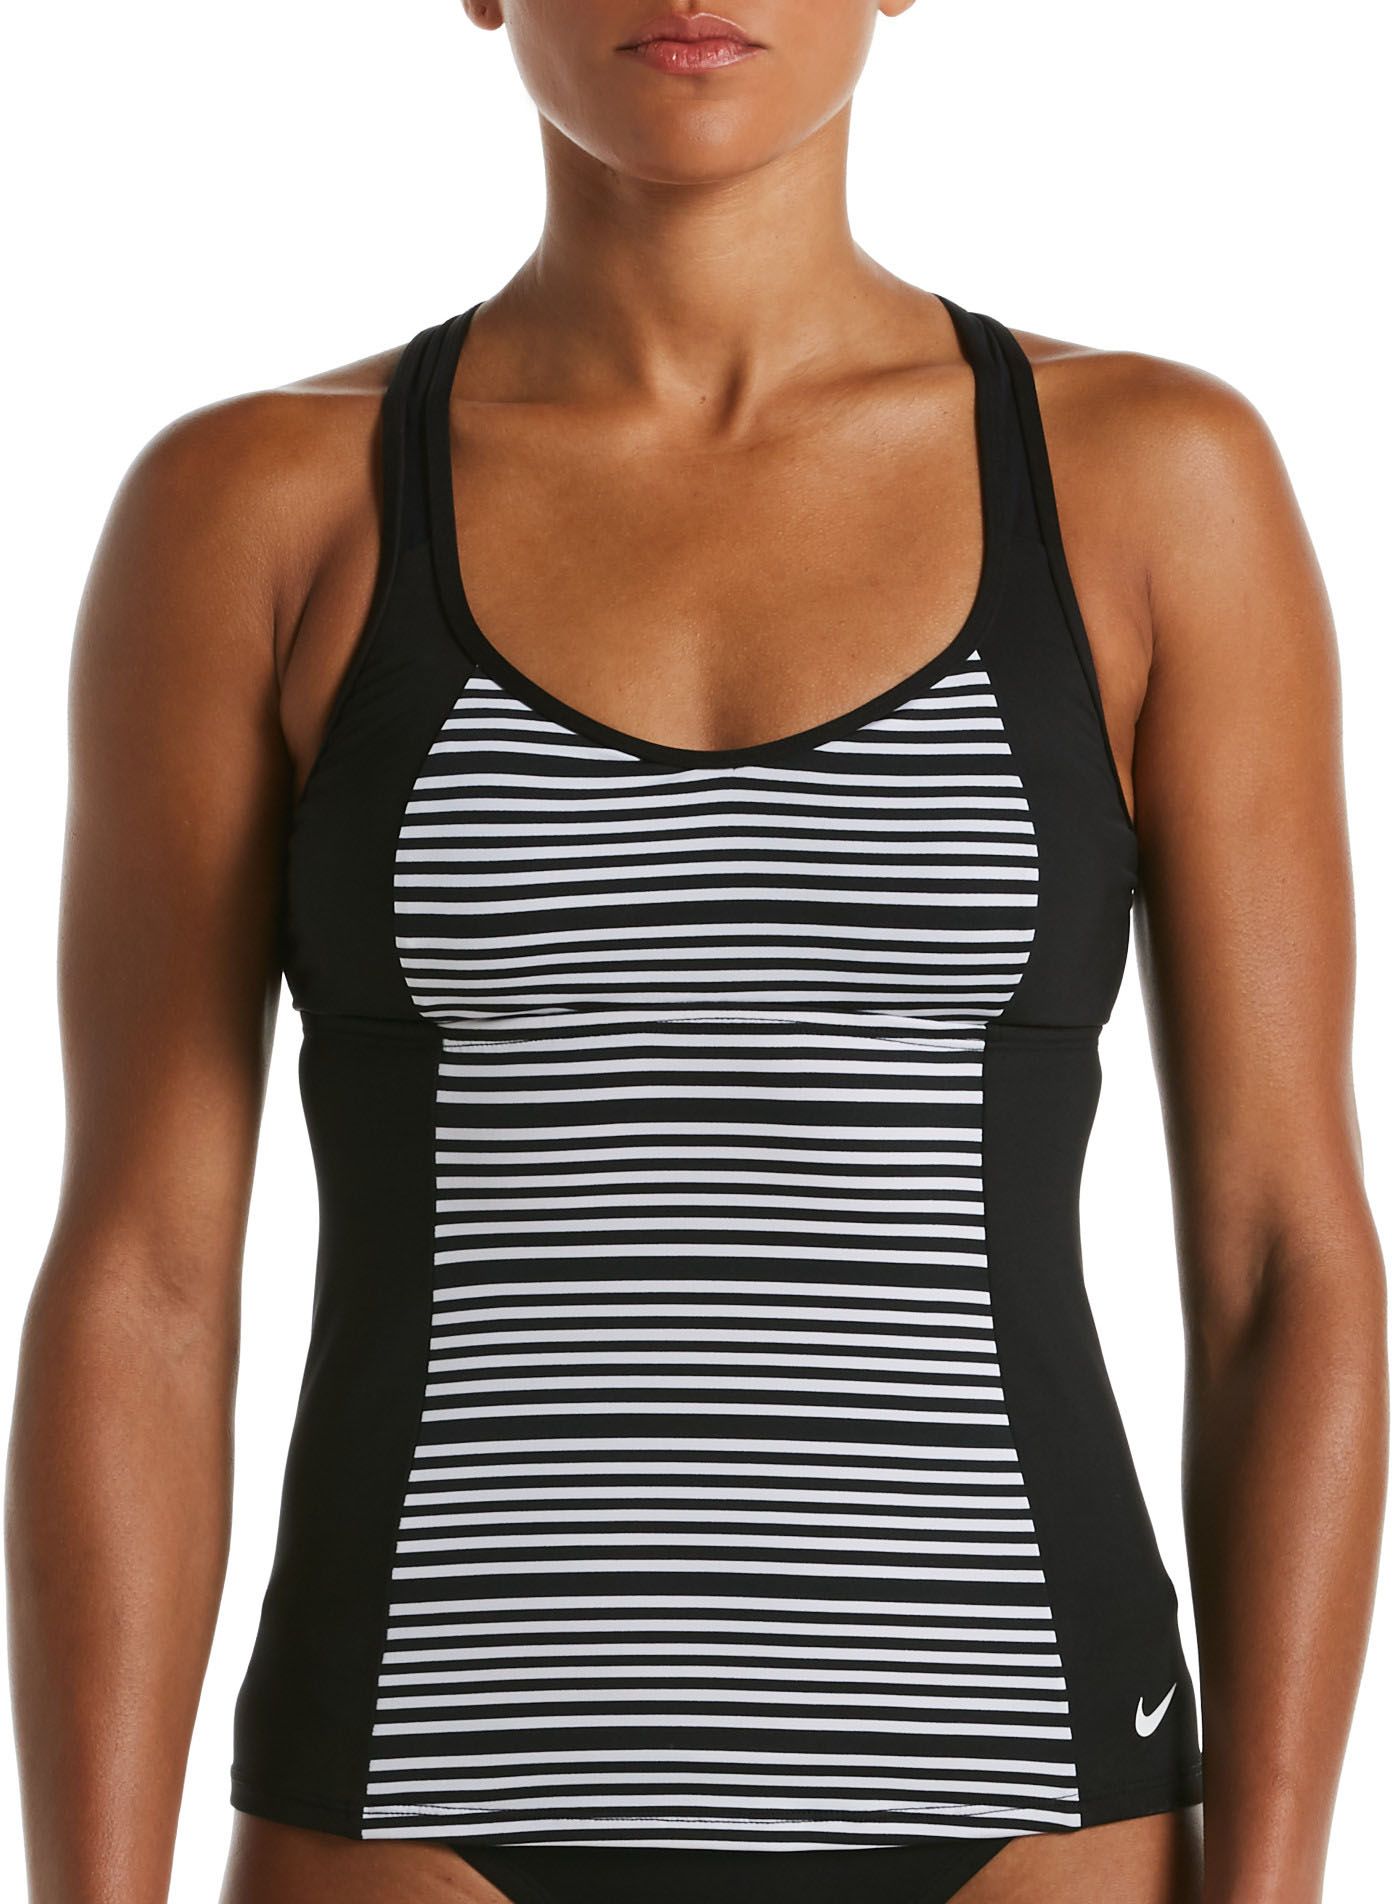 nike bathing suit tops,Save up to 16%,www.sassycleanersmd.com